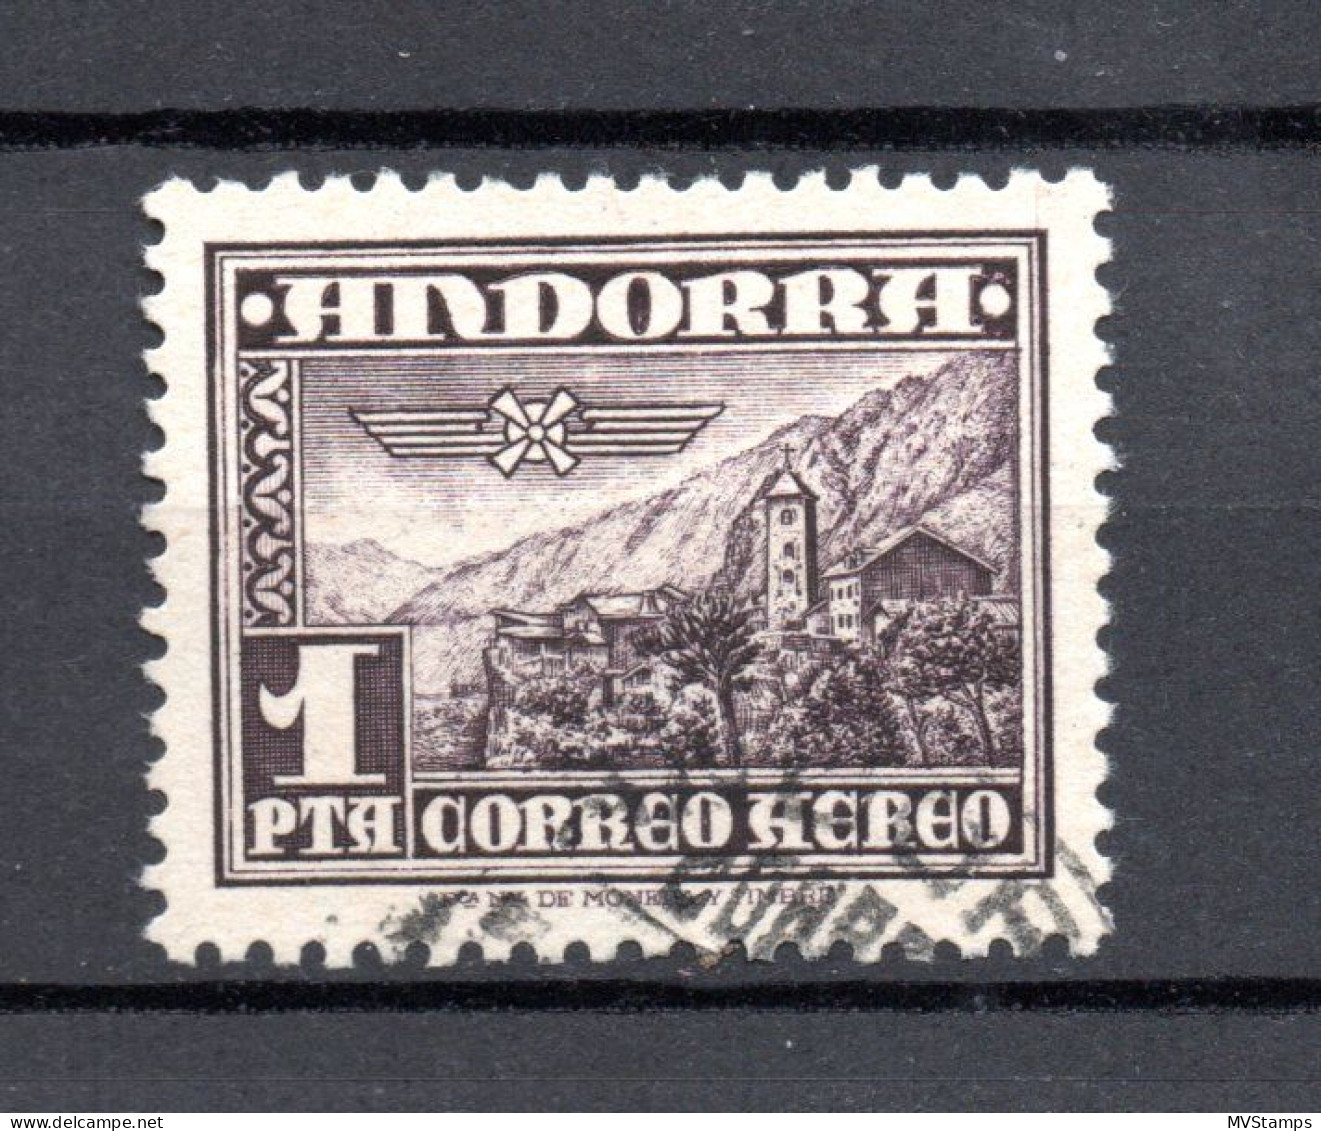 Andorra 1951 Old Definitive Airmail Stamp (Michel 58) Used - Oblitérés